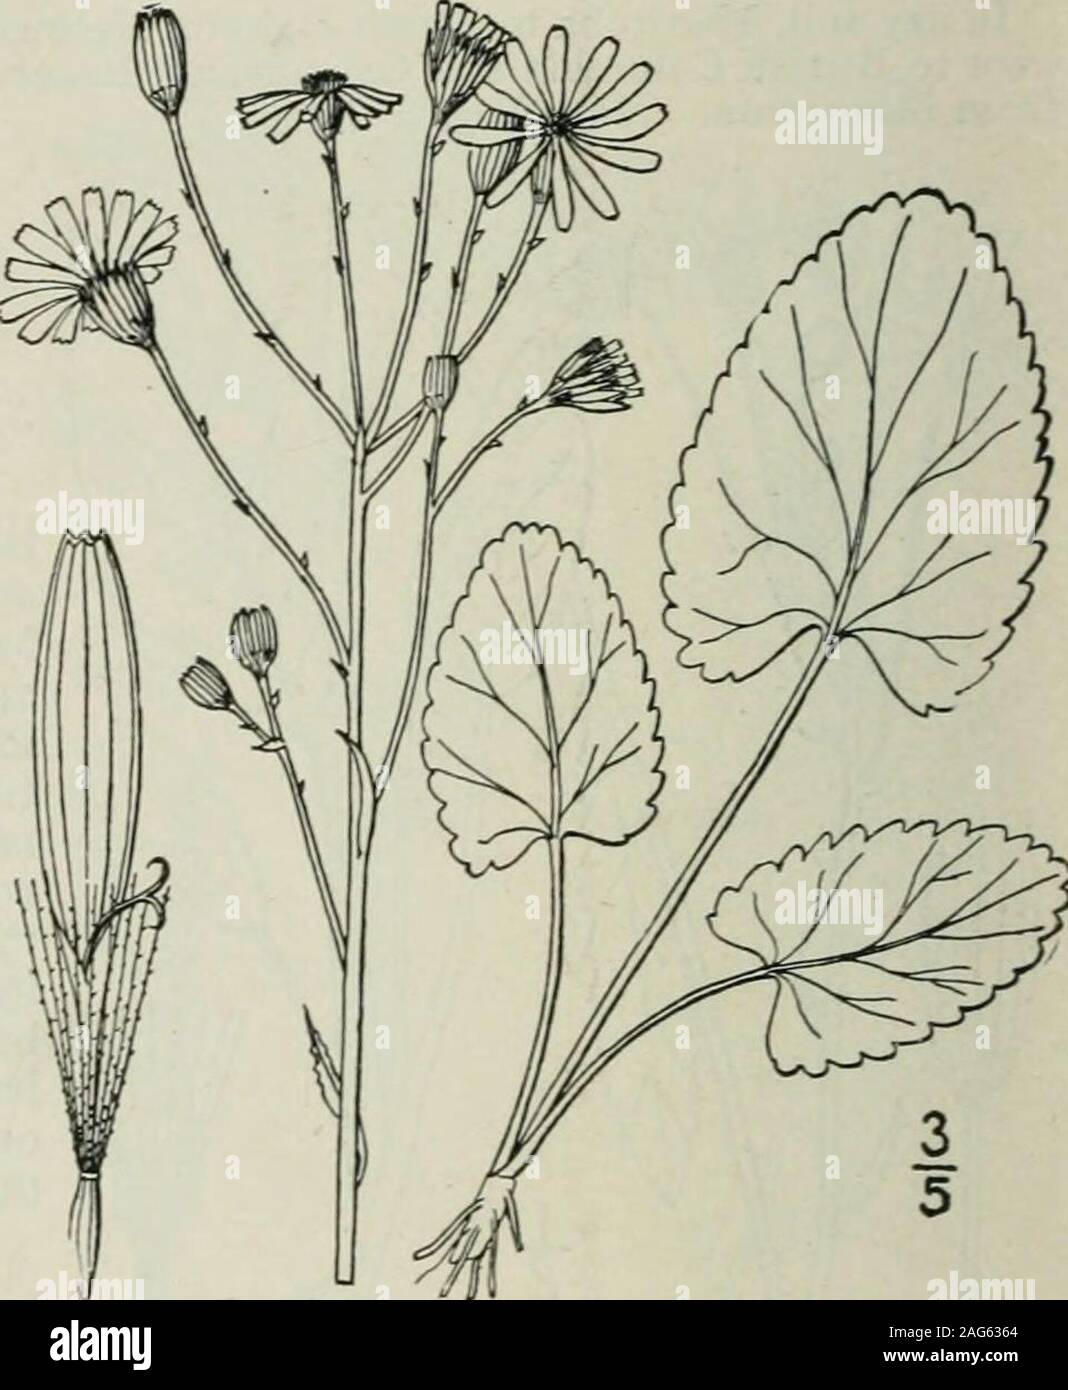 . An illustrated flora of the northern United States, Canada and the British possessions : from Newfoundland to the parallel of the southern boundary of Virginia and from the Atlantic Ocean westward to the 102nd meridian. d New York. June-Sept. 16. Senecio aureus L. Golden Ragwort. Life-root. Swamp Squaw-weed. Fig. 4625. Senecio aureus L. Sp. PI. 870. 1753. Senecio paiiciflorus Pursh, Fl. Am. Sept. 529. 1814. Senecio gracilis Pursh, Fl. Am. Sept. 529. 1814. Perennial, glabrous or very nearly so through-out; stems rather slender, solitary or tufted,6-2*° high. Basal leaves cordate-ovate orcorda Stock Photo